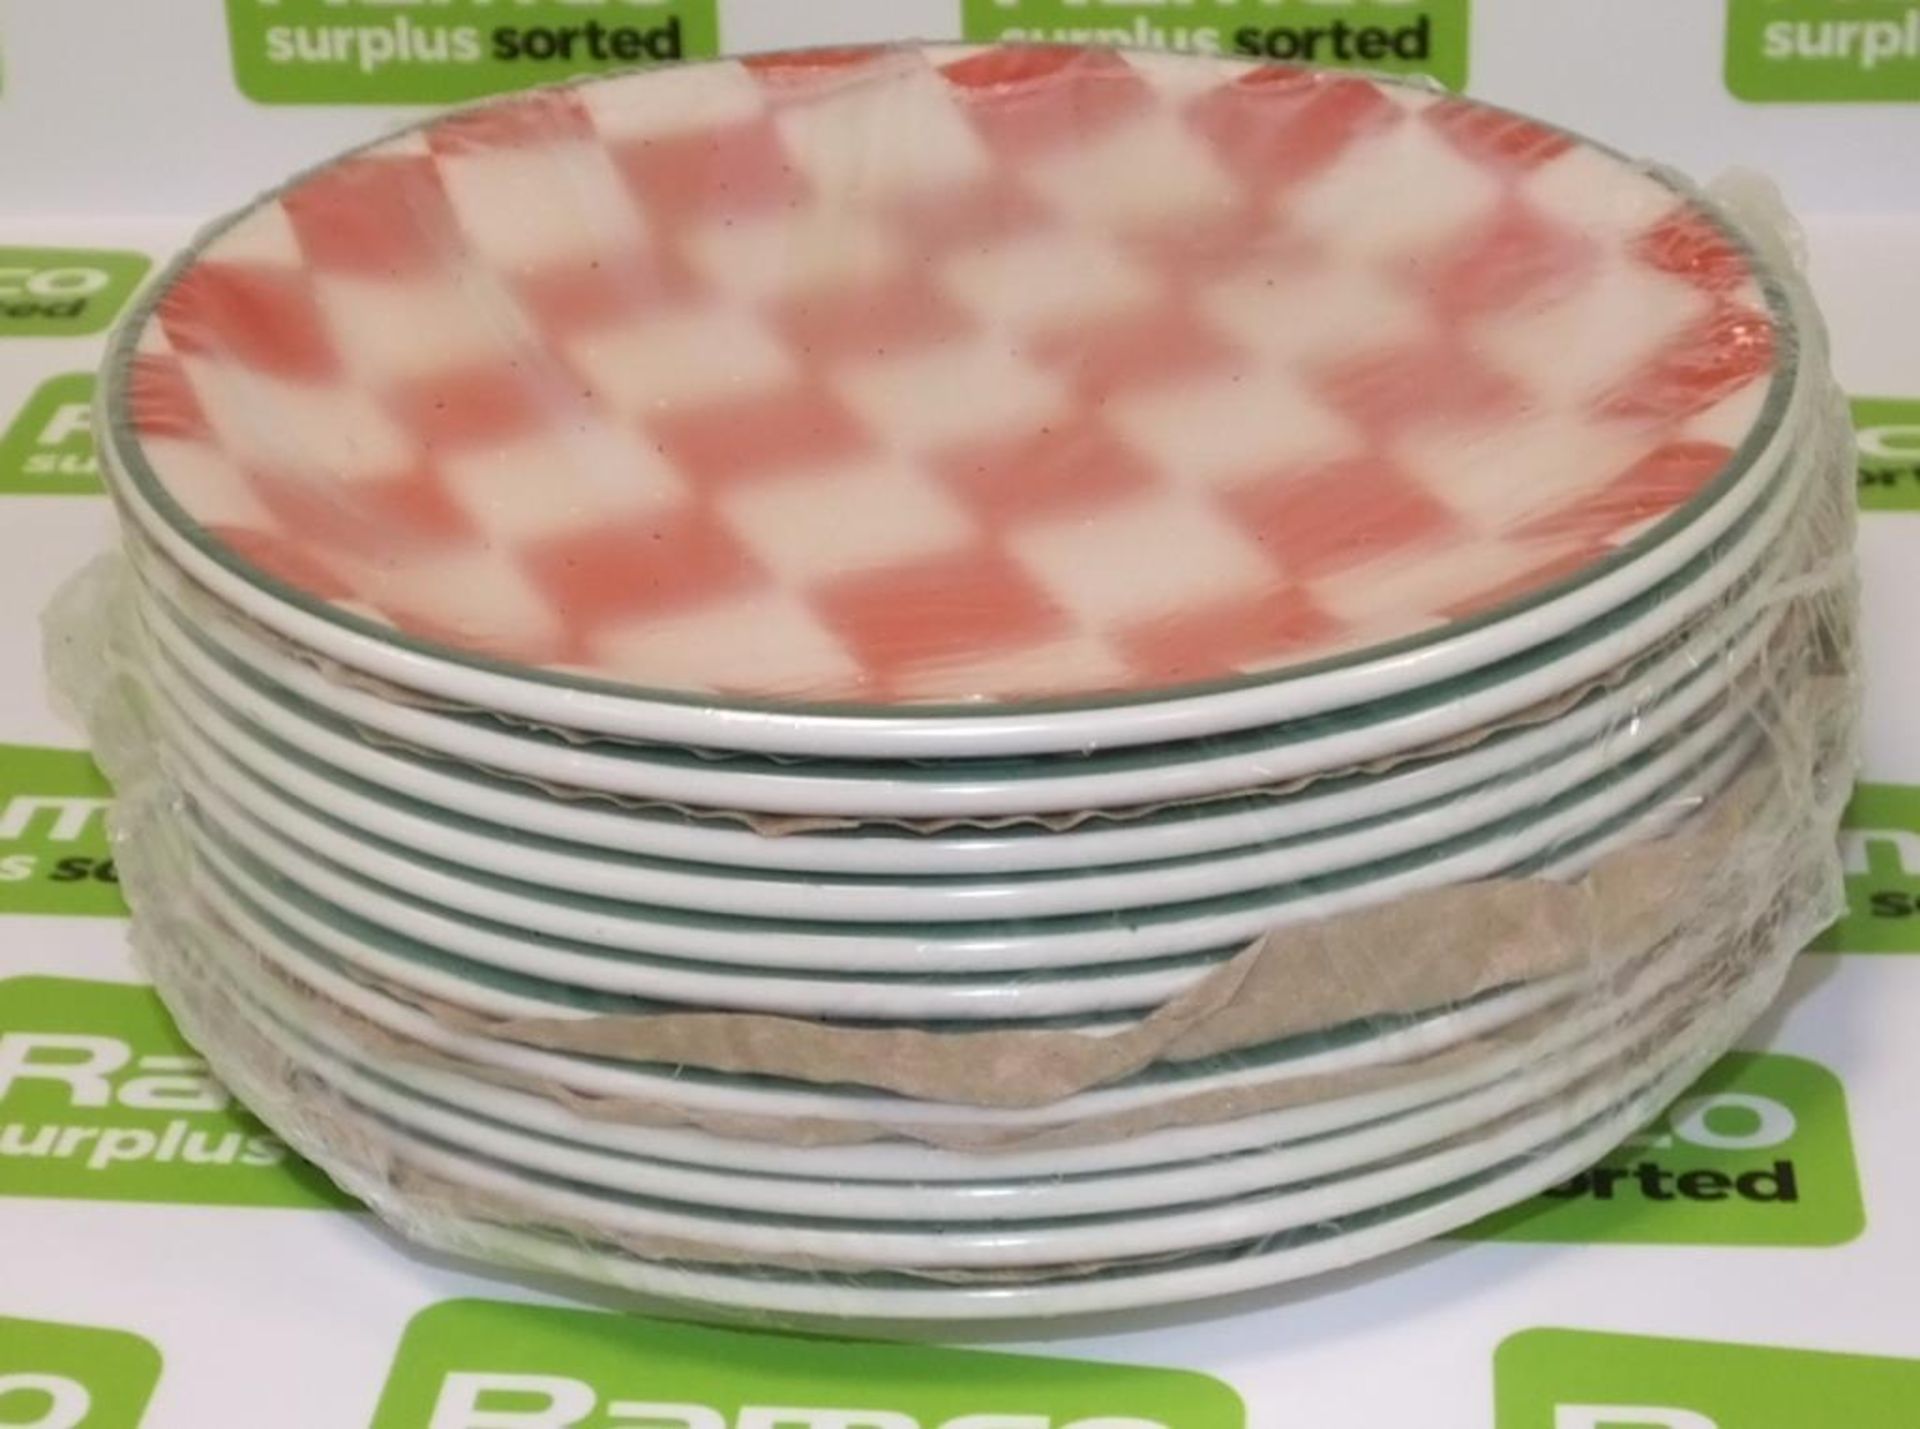 Steelite table setting plates - Red Check/Green Rim Plate Coupe 20.25cm / 8 in - 12 per box 6 boxes - Image 2 of 5